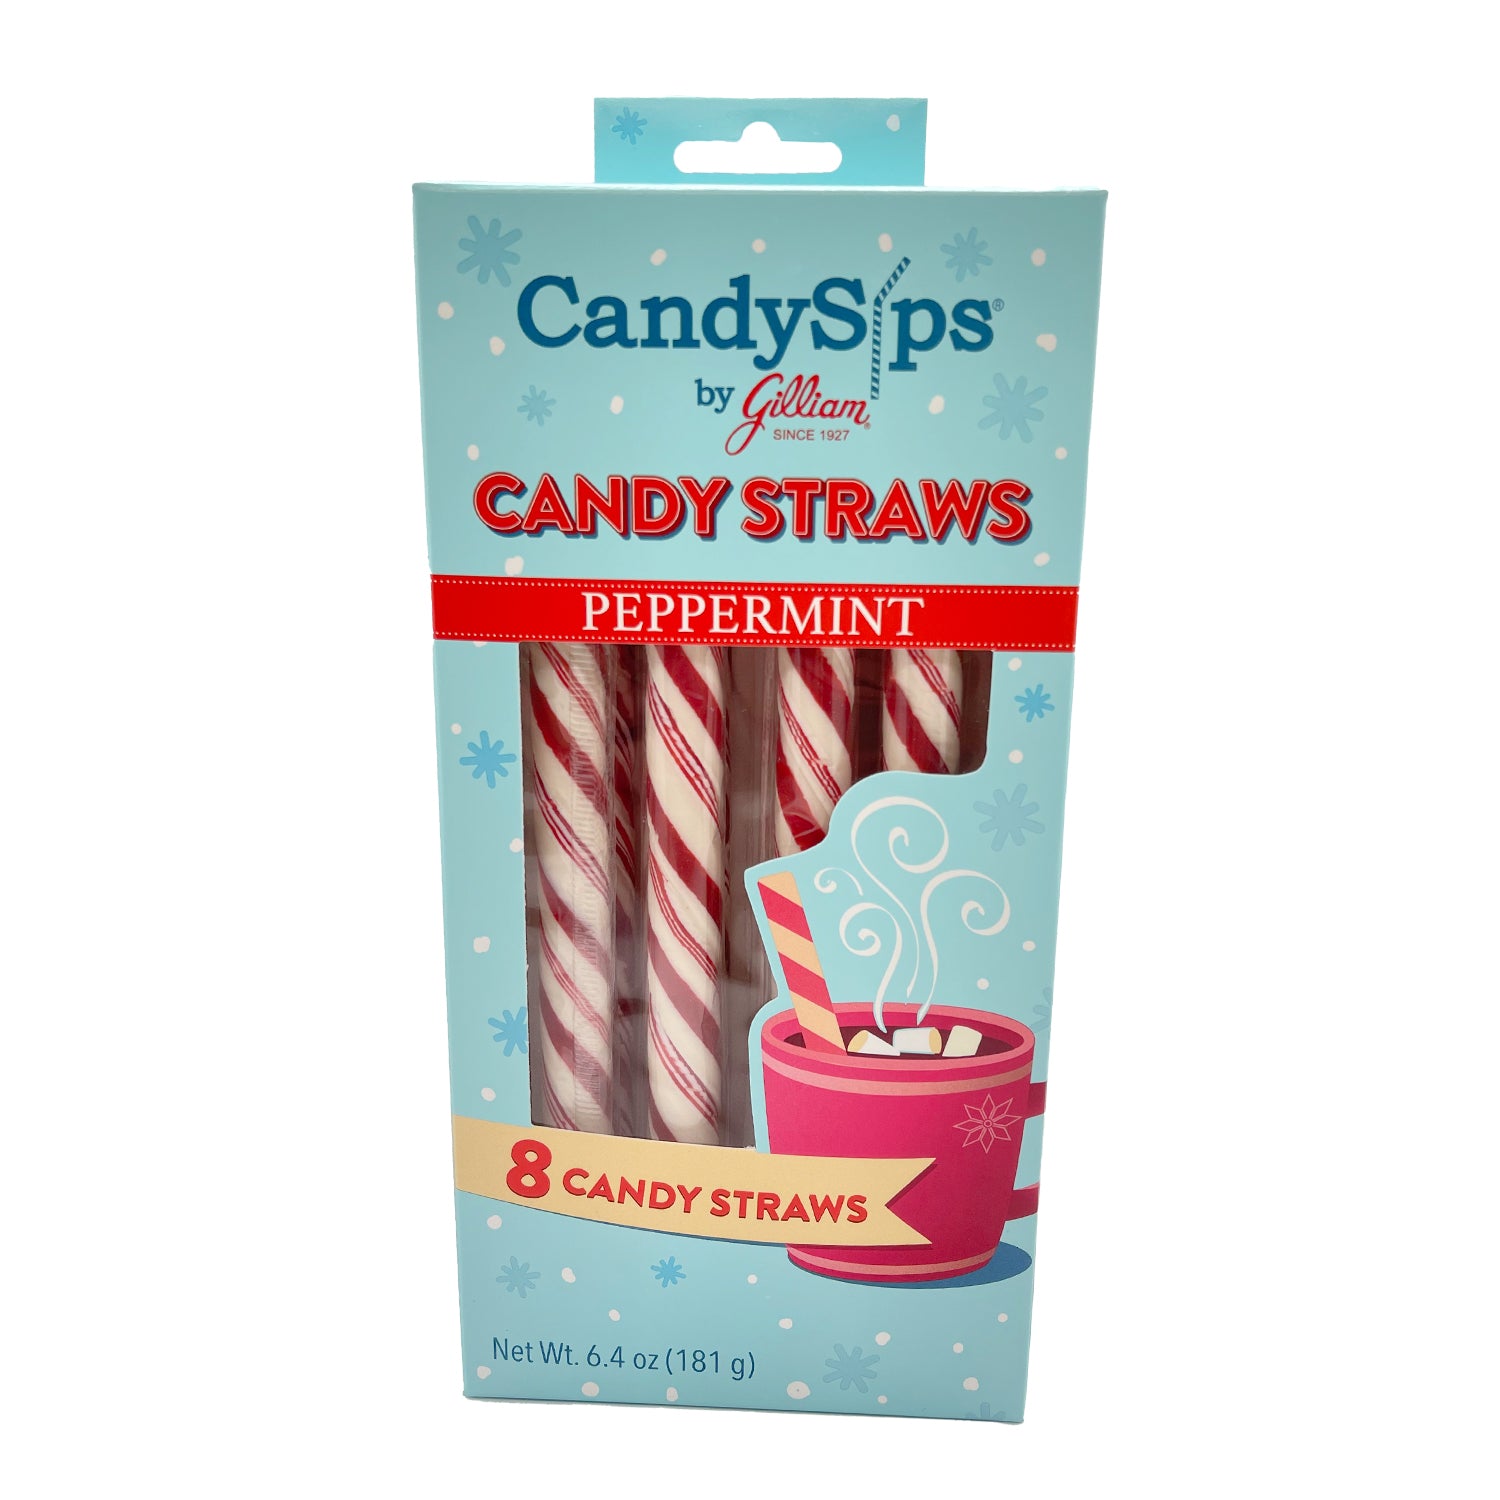 Christmas Straws (25 Pack) - Candy Cane Red and Green Stripes & North Pole  Party Straws, Christmas Party Supplies, Holiday Decor Drinking Straws